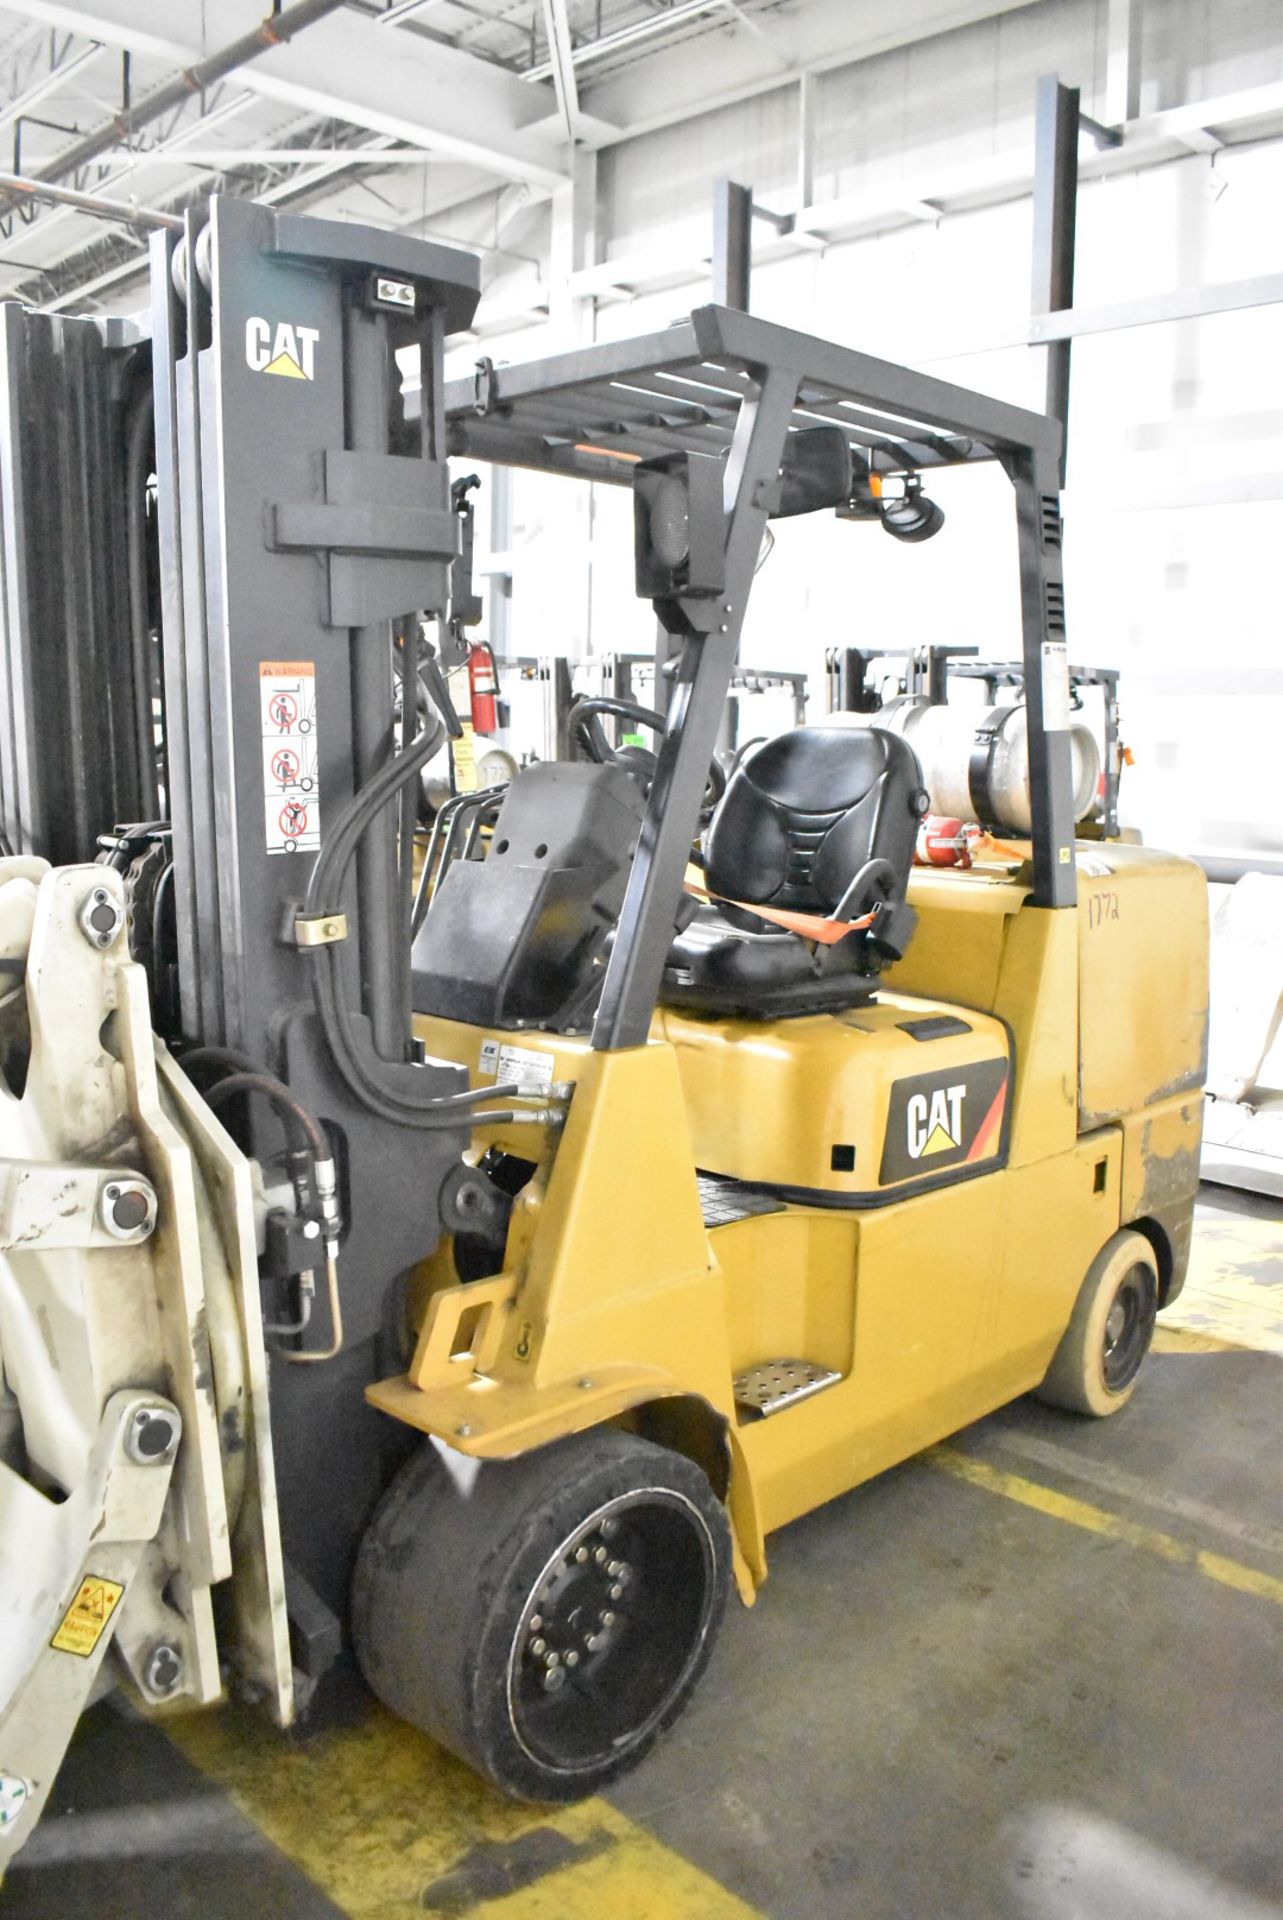 CATERPILLAR (2016) GC55K 7,200 LBS. CAPACITY LPG FORKLIFT WITH 172" MAX VERTICAL REACH, 3-STAGE HIGH - Image 4 of 10